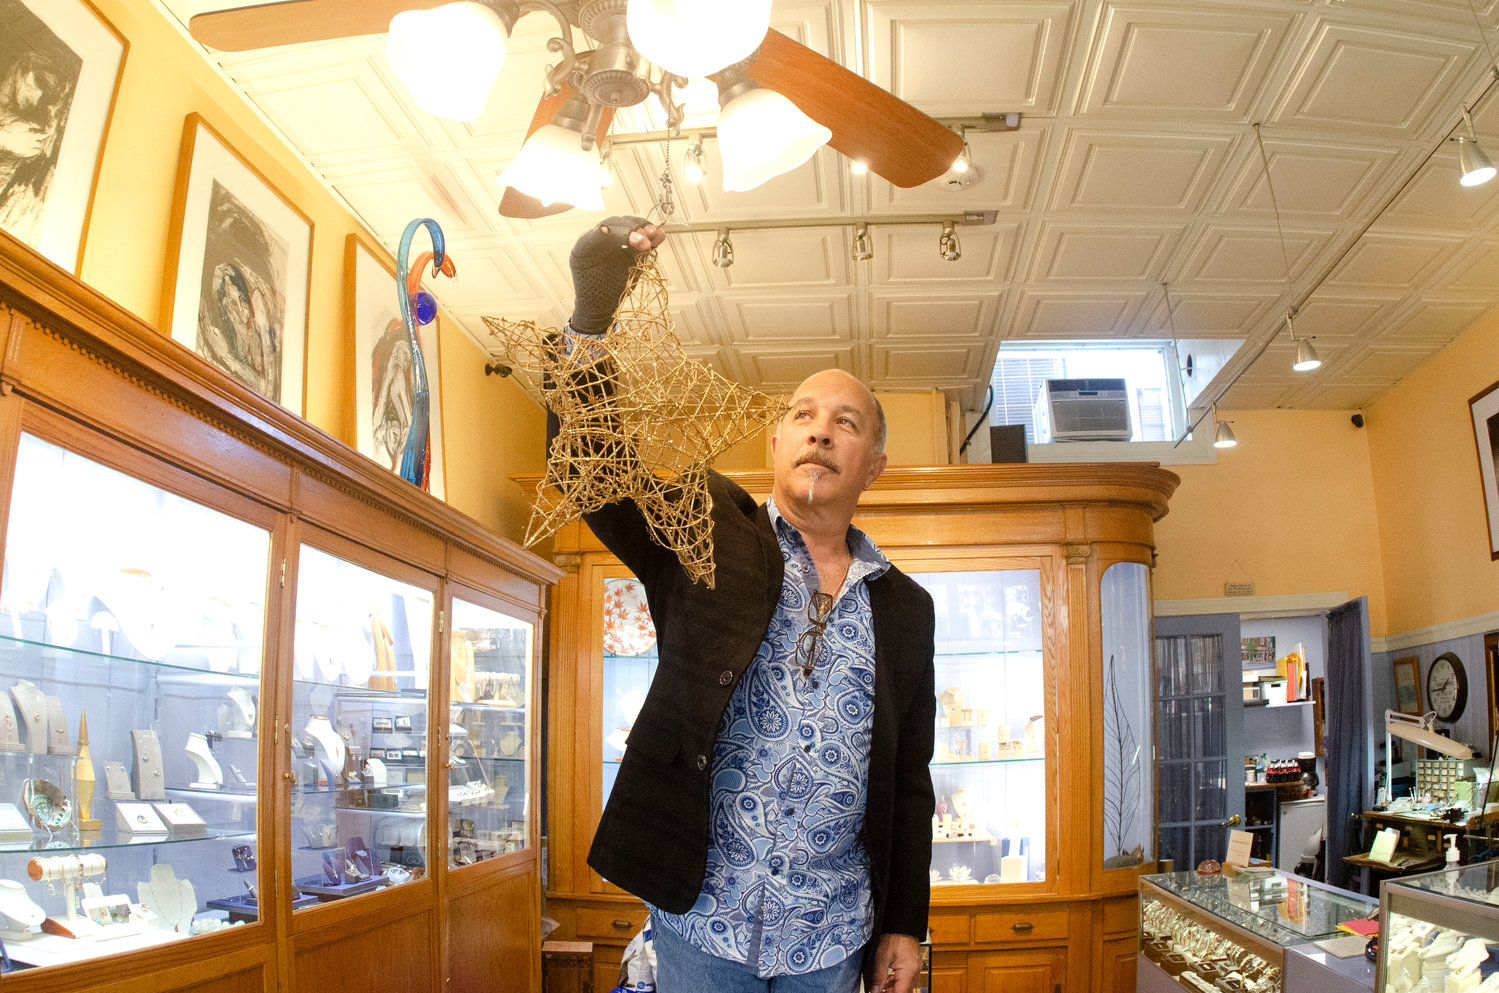 Joe Caron of Caron’s Jewelers makes preparations for Friday night’s Holiday Preview and the kickoff of the Snowflake Raffle. The Preview will be held Friday from 5 to 9 p.m.; follow the luminaries to participating businesses.